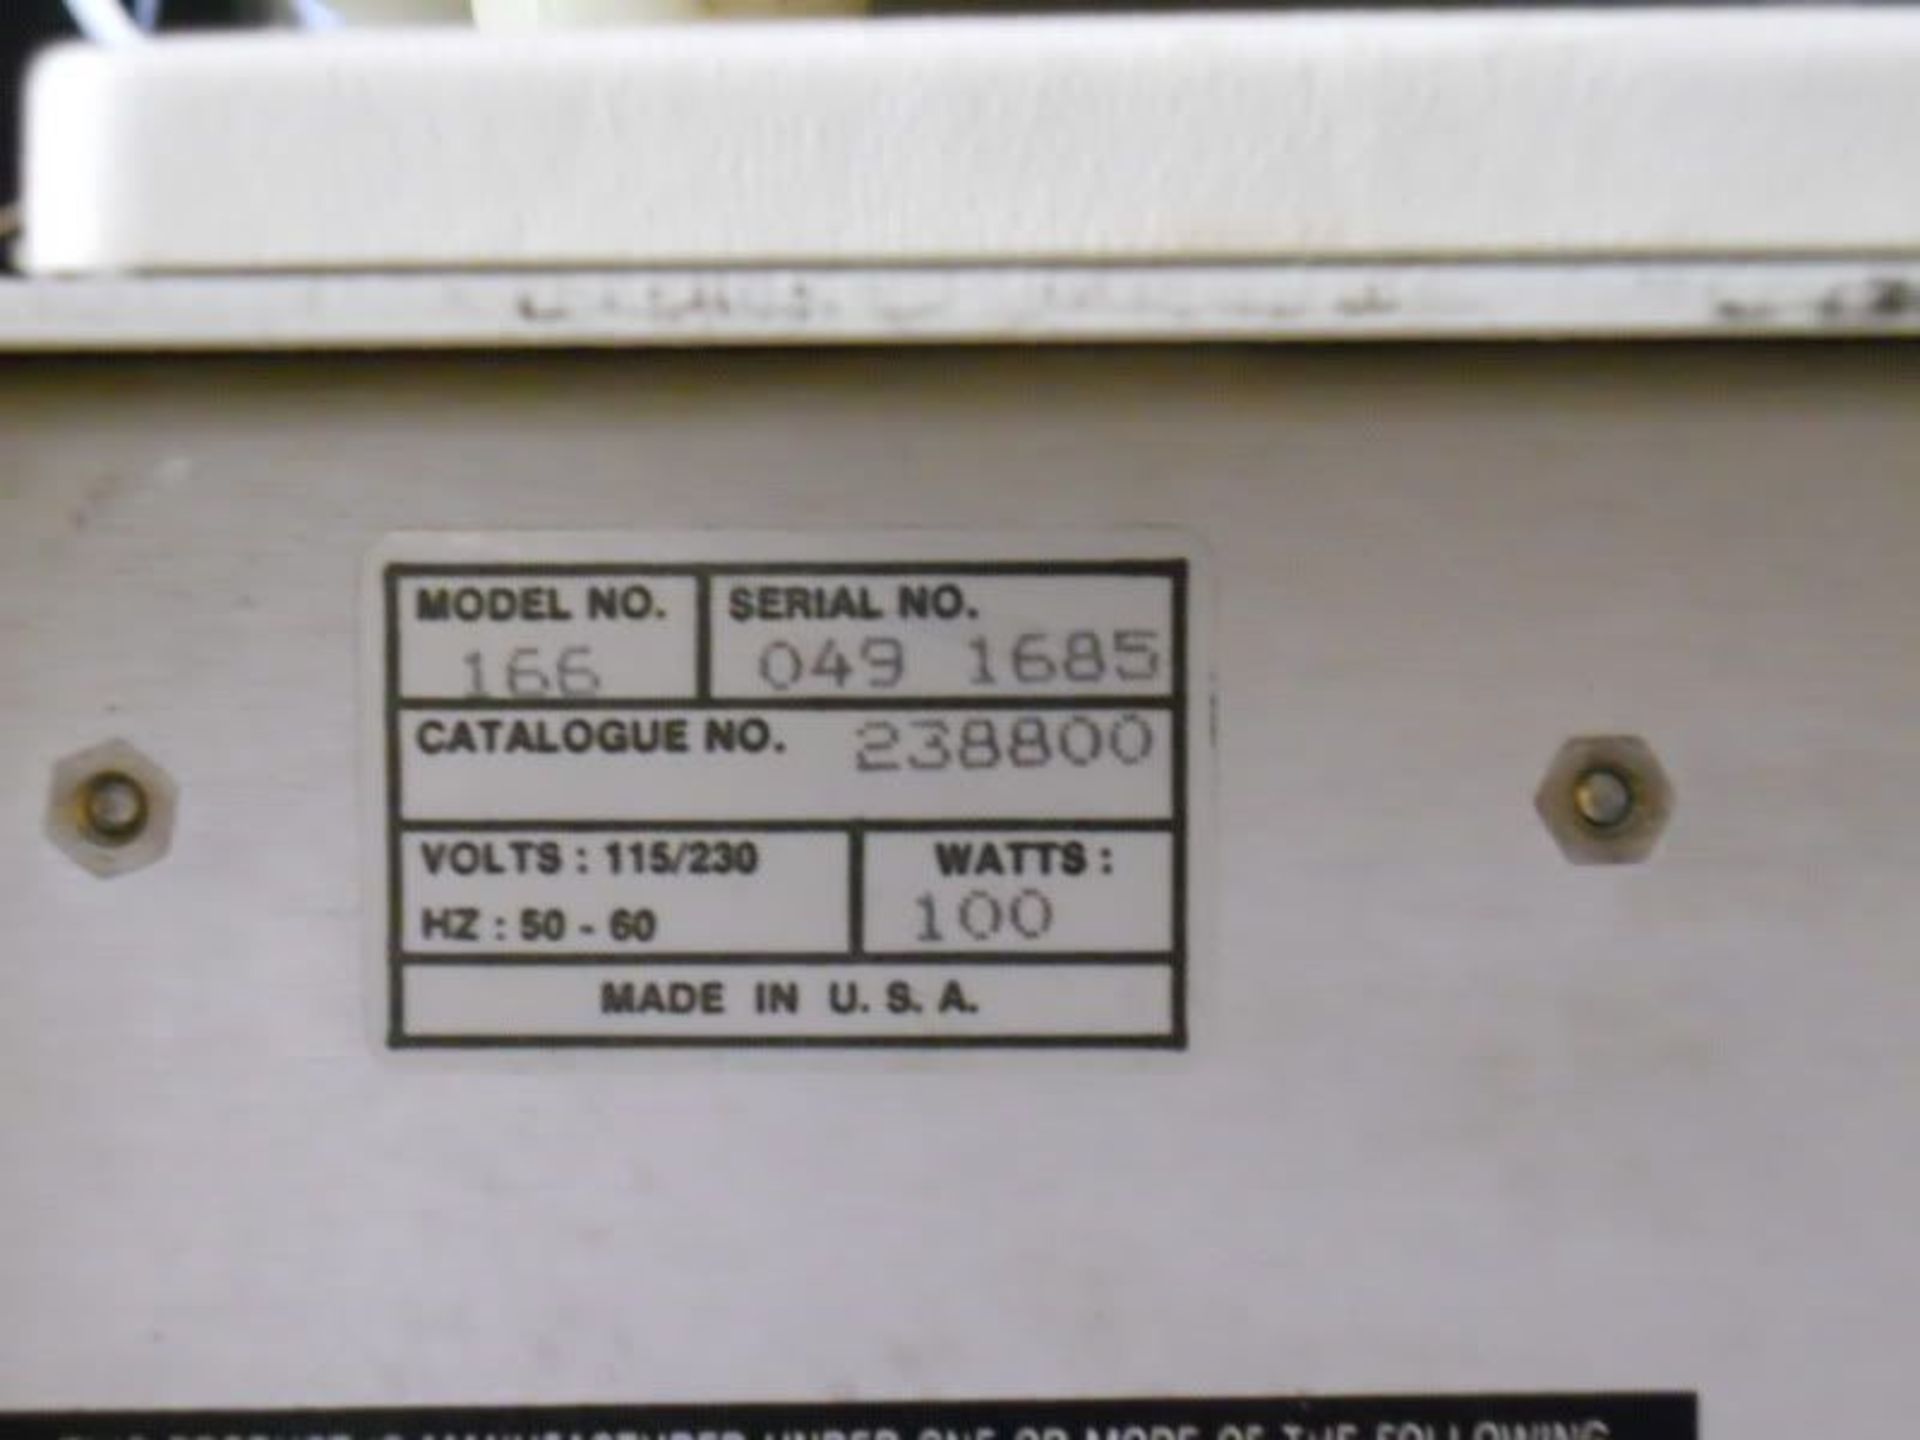 Beckman System Gold Programmable Solvent Pump (126) & Detector (166) Modules, Qty 1, 221501282636 - Image 12 of 19